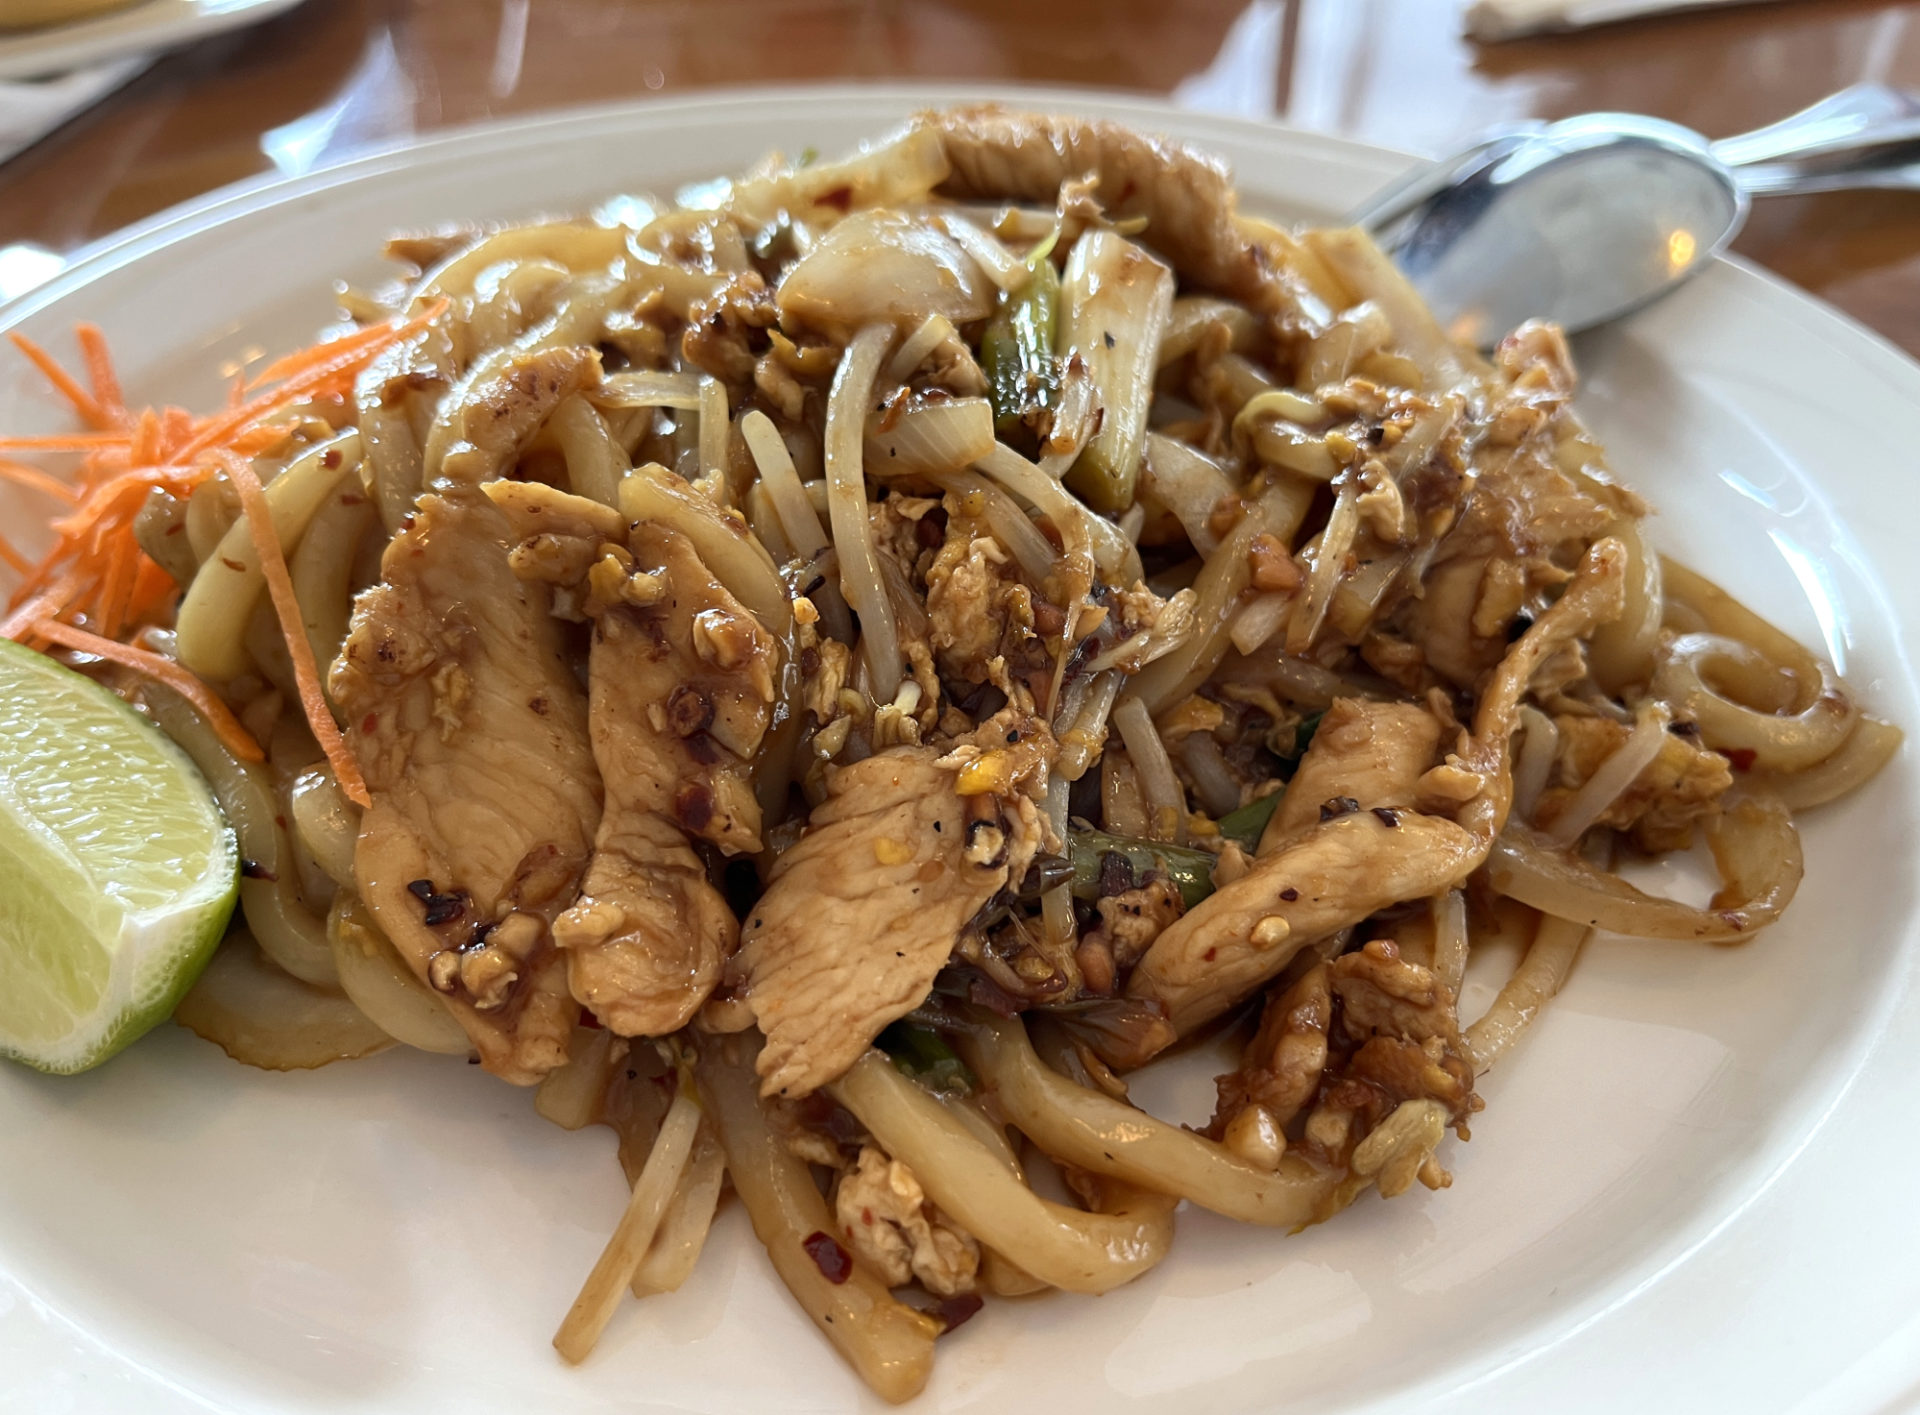 Chicken Pad Thai at Thara Thai. A white plate holds a heaping pile of noodles and chicken, a slice of lime and some carrot shavings.